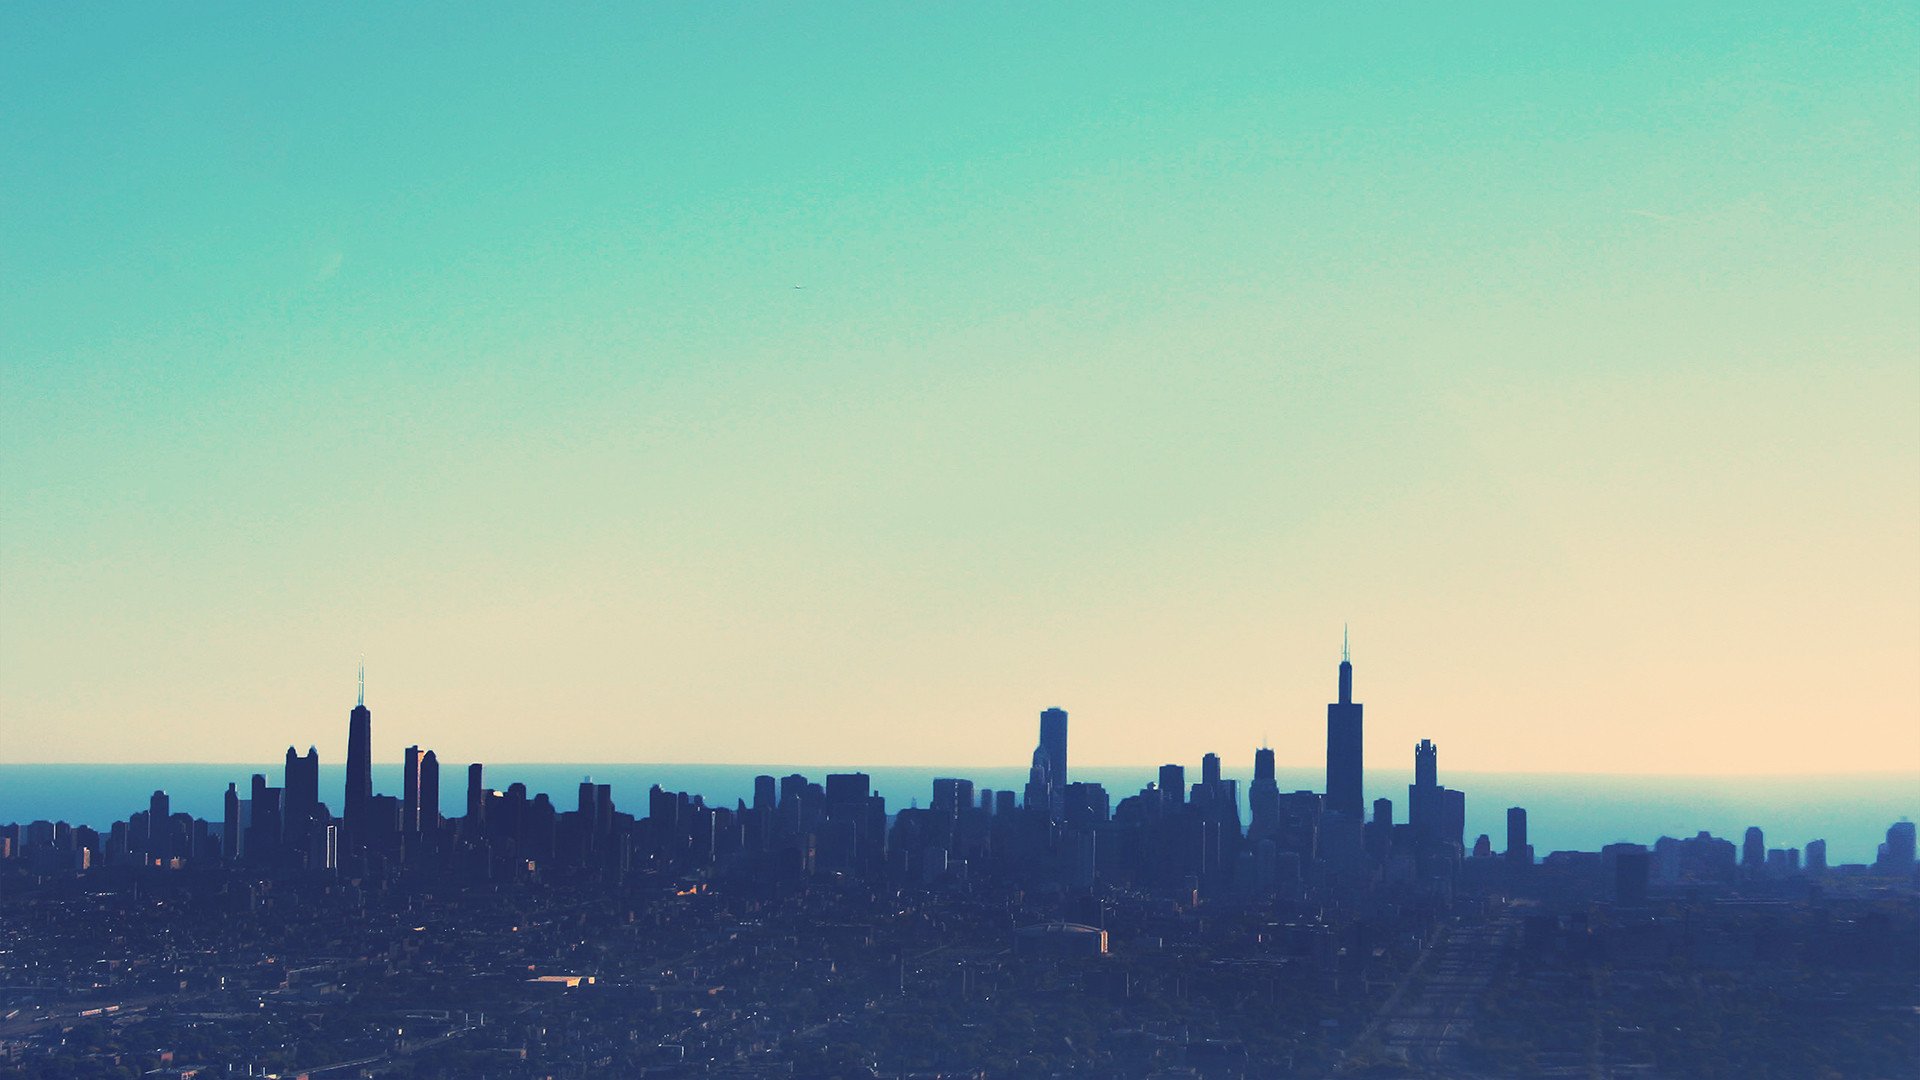 Chicago City Skyline 3840x2160202199 Resolution Wallpaper, HD City 4K Wallpaper, Image, Photo and Background